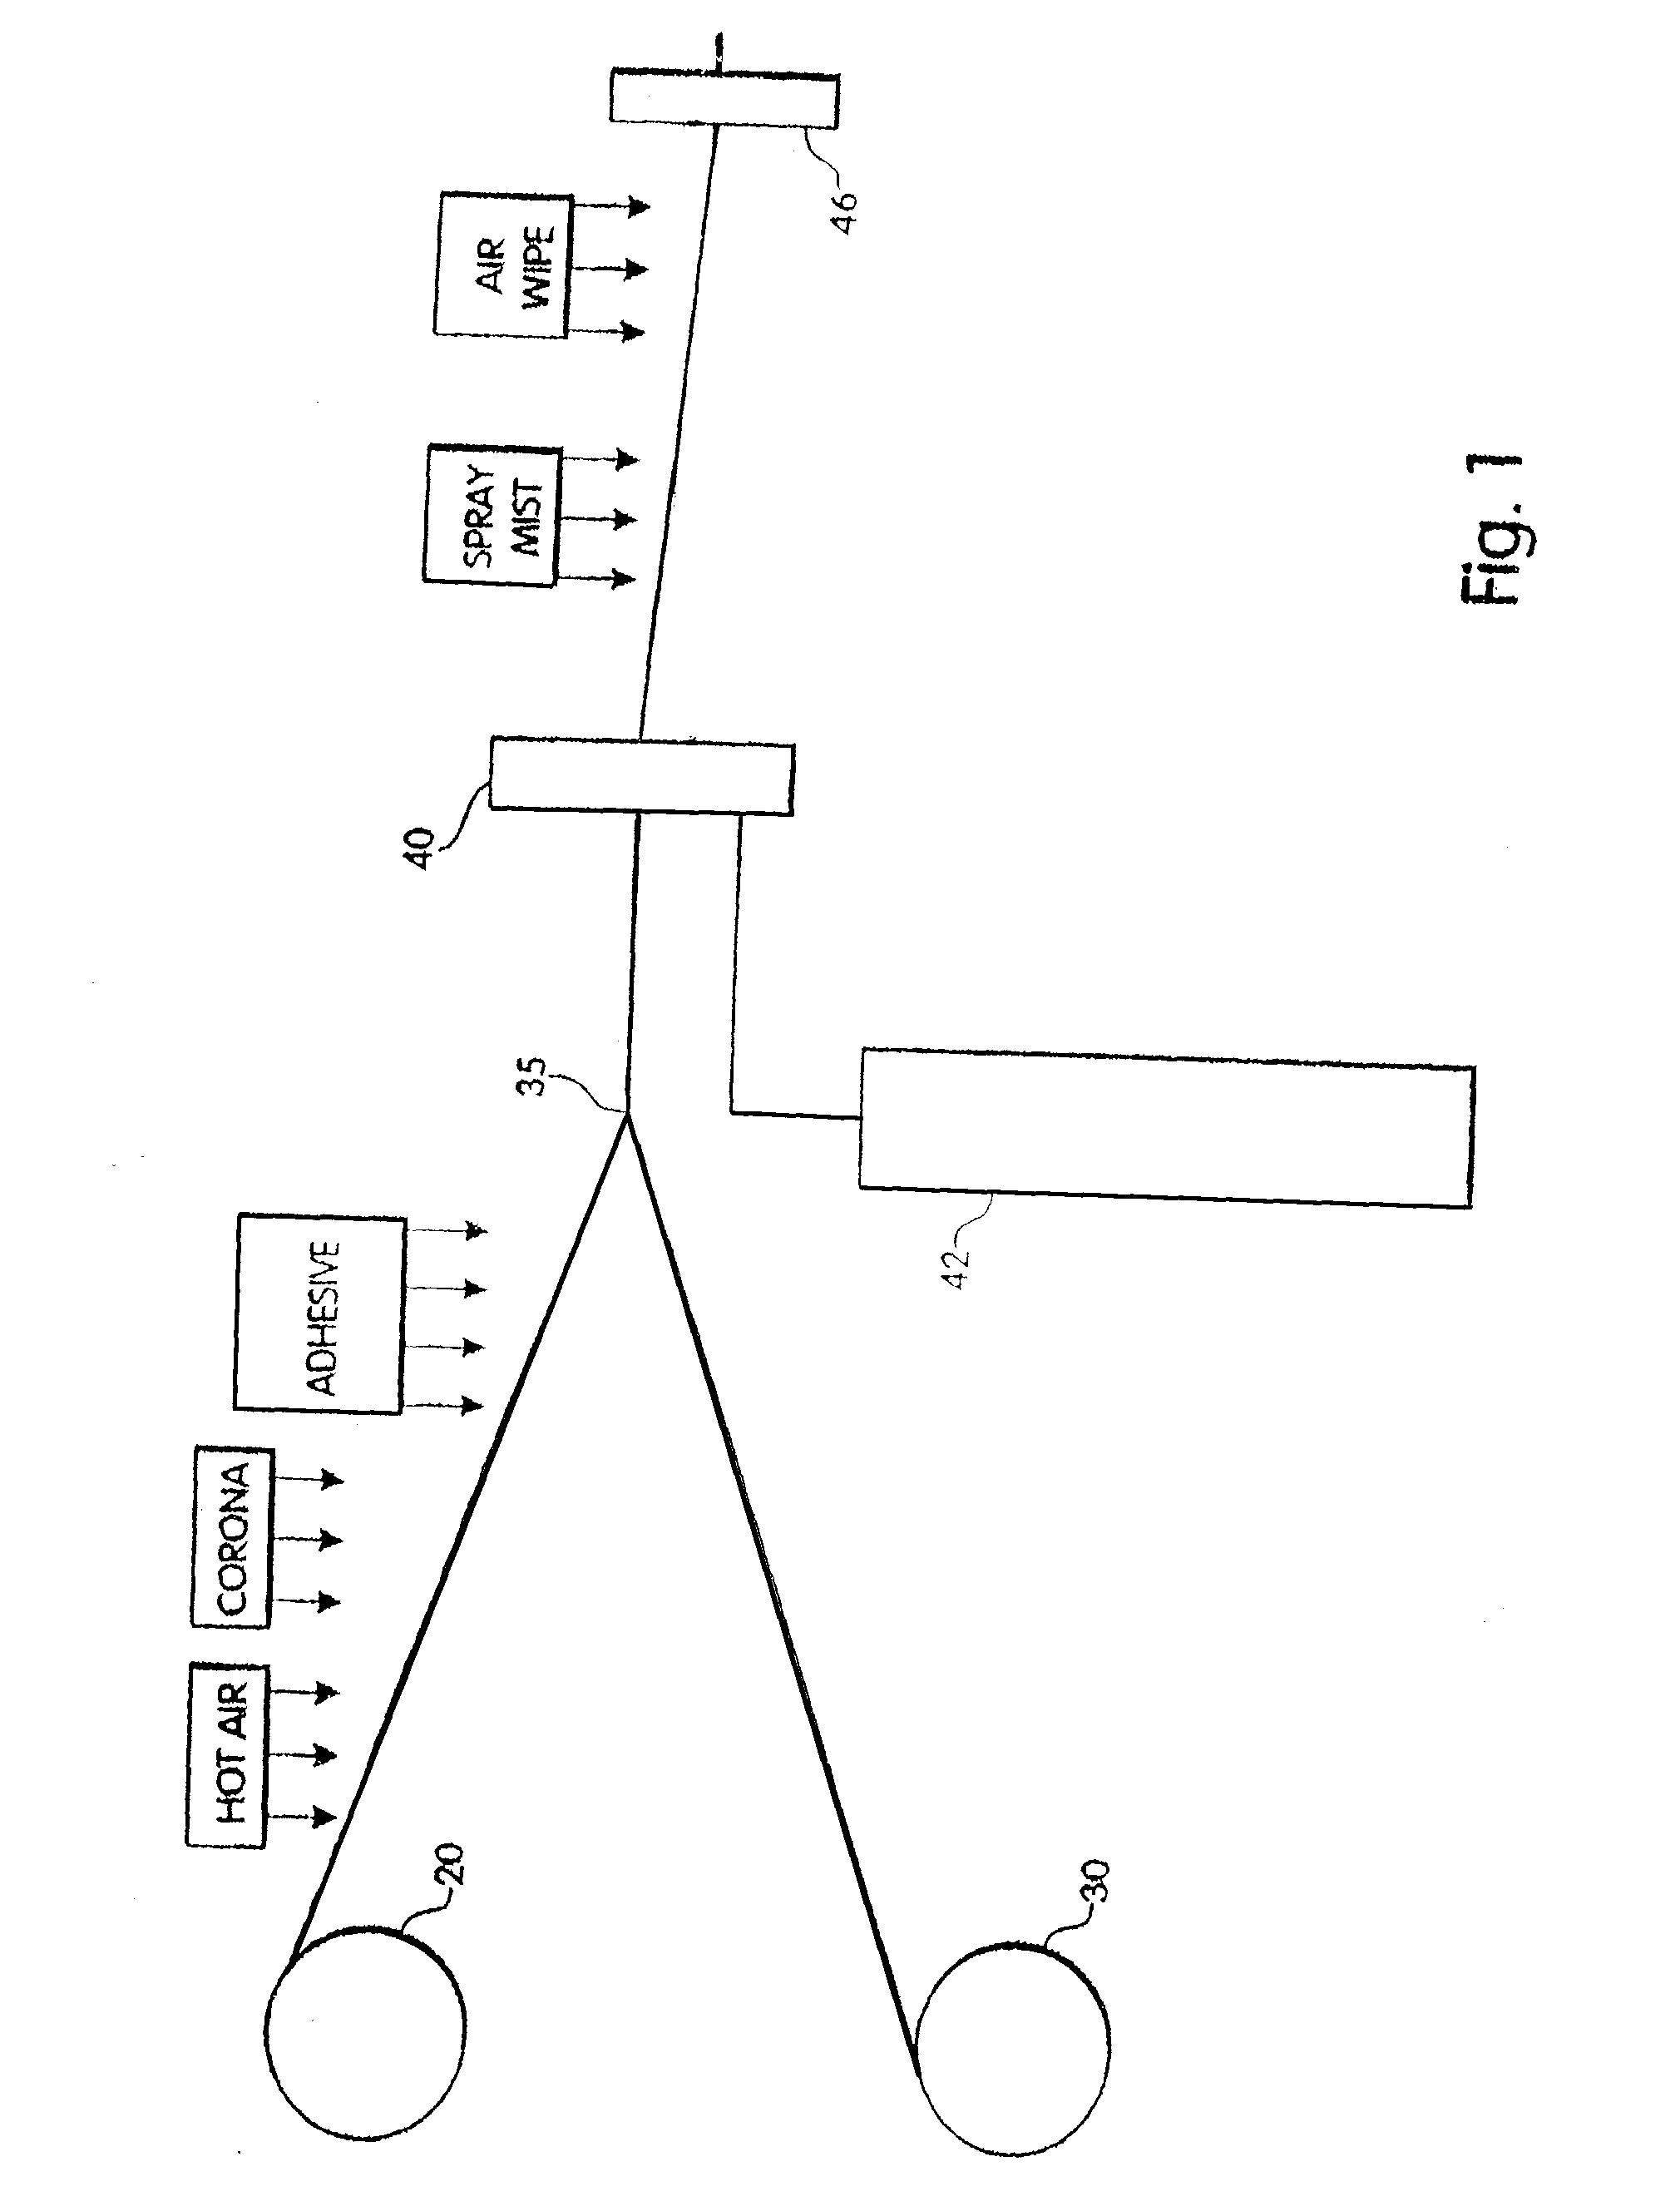 Systems and Methods for Manufacturing Reinforced Weatherstrip